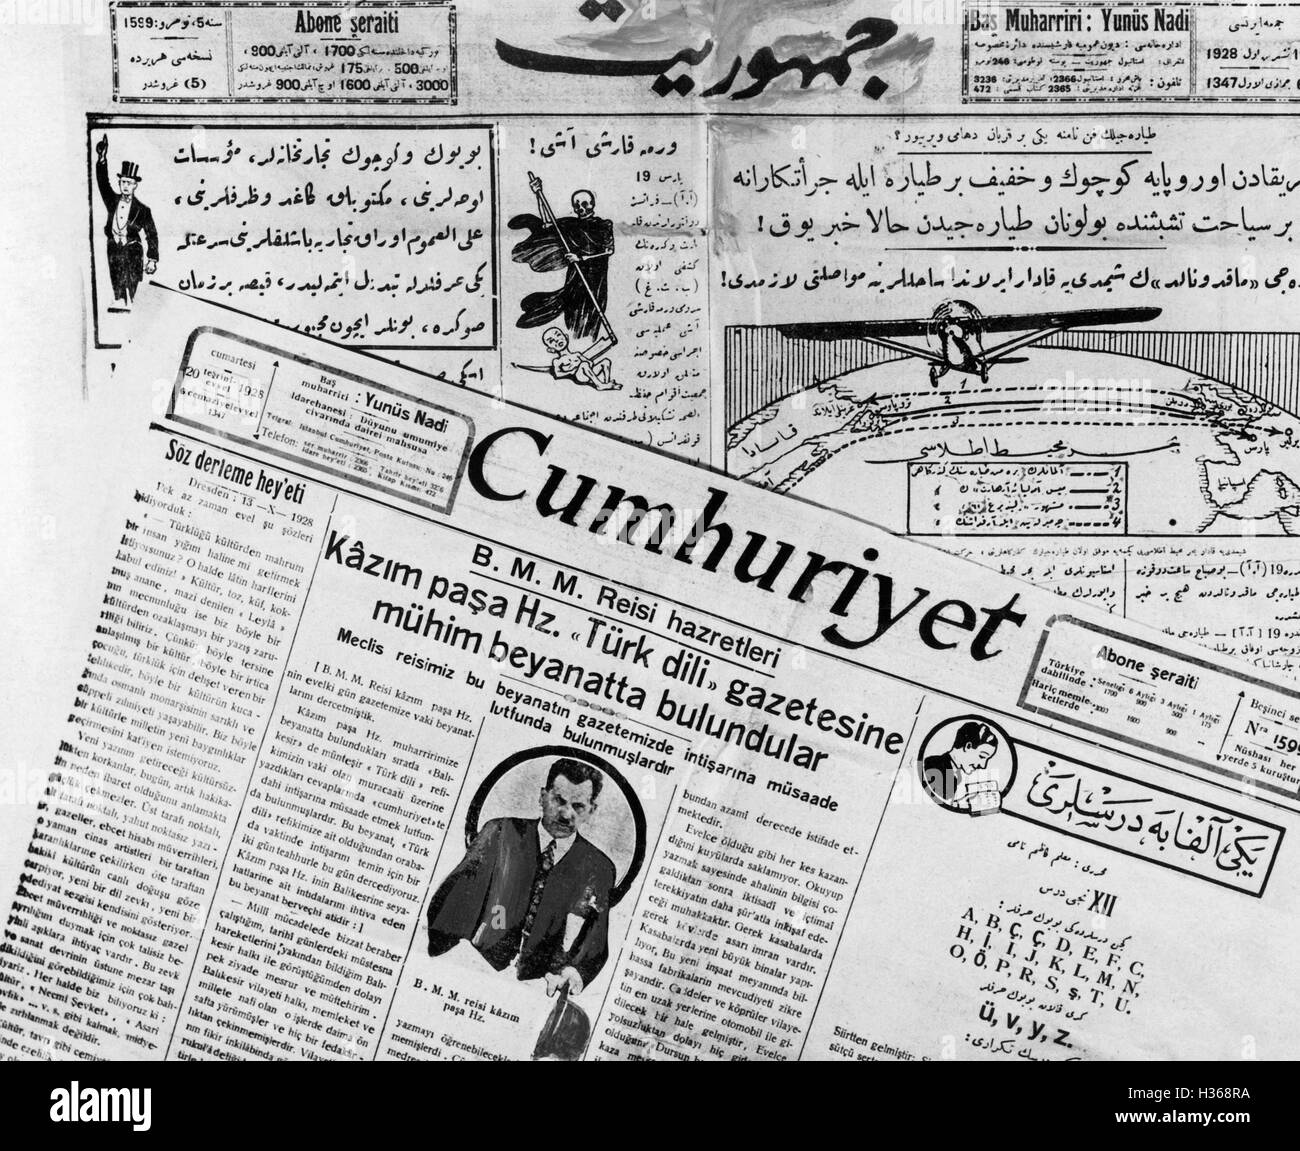 The Turkish language reform illustrated with a newspaper, 1928 Stock Photo